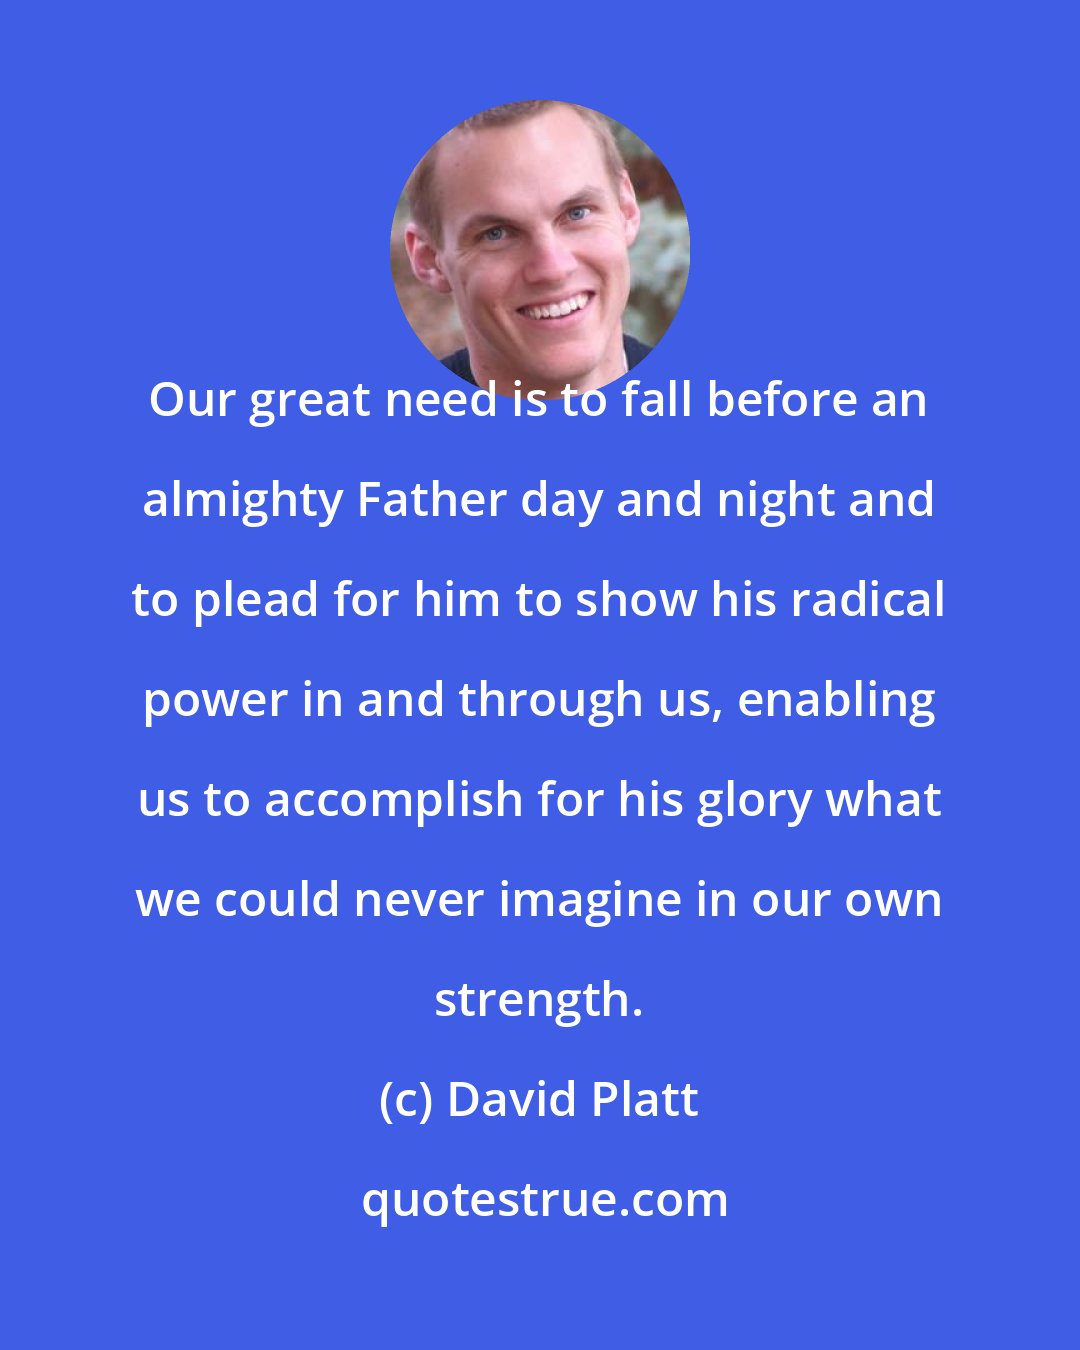 David Platt: Our great need is to fall before an almighty Father day and night and to plead for him to show his radical power in and through us, enabling us to accomplish for his glory what we could never imagine in our own strength.